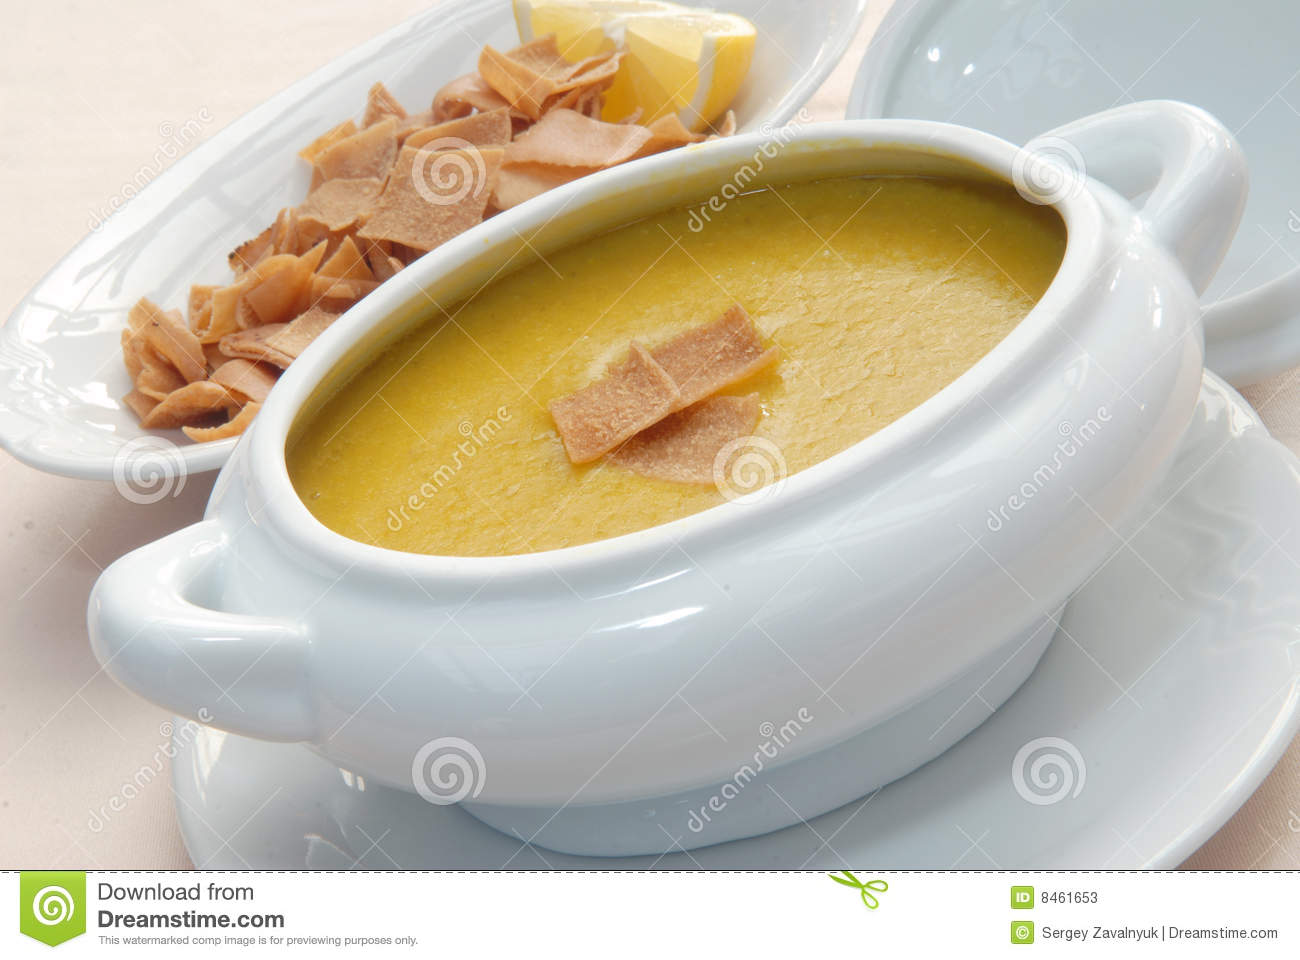 Lentil Soup With Crackers Stock Photos   Image  8461653